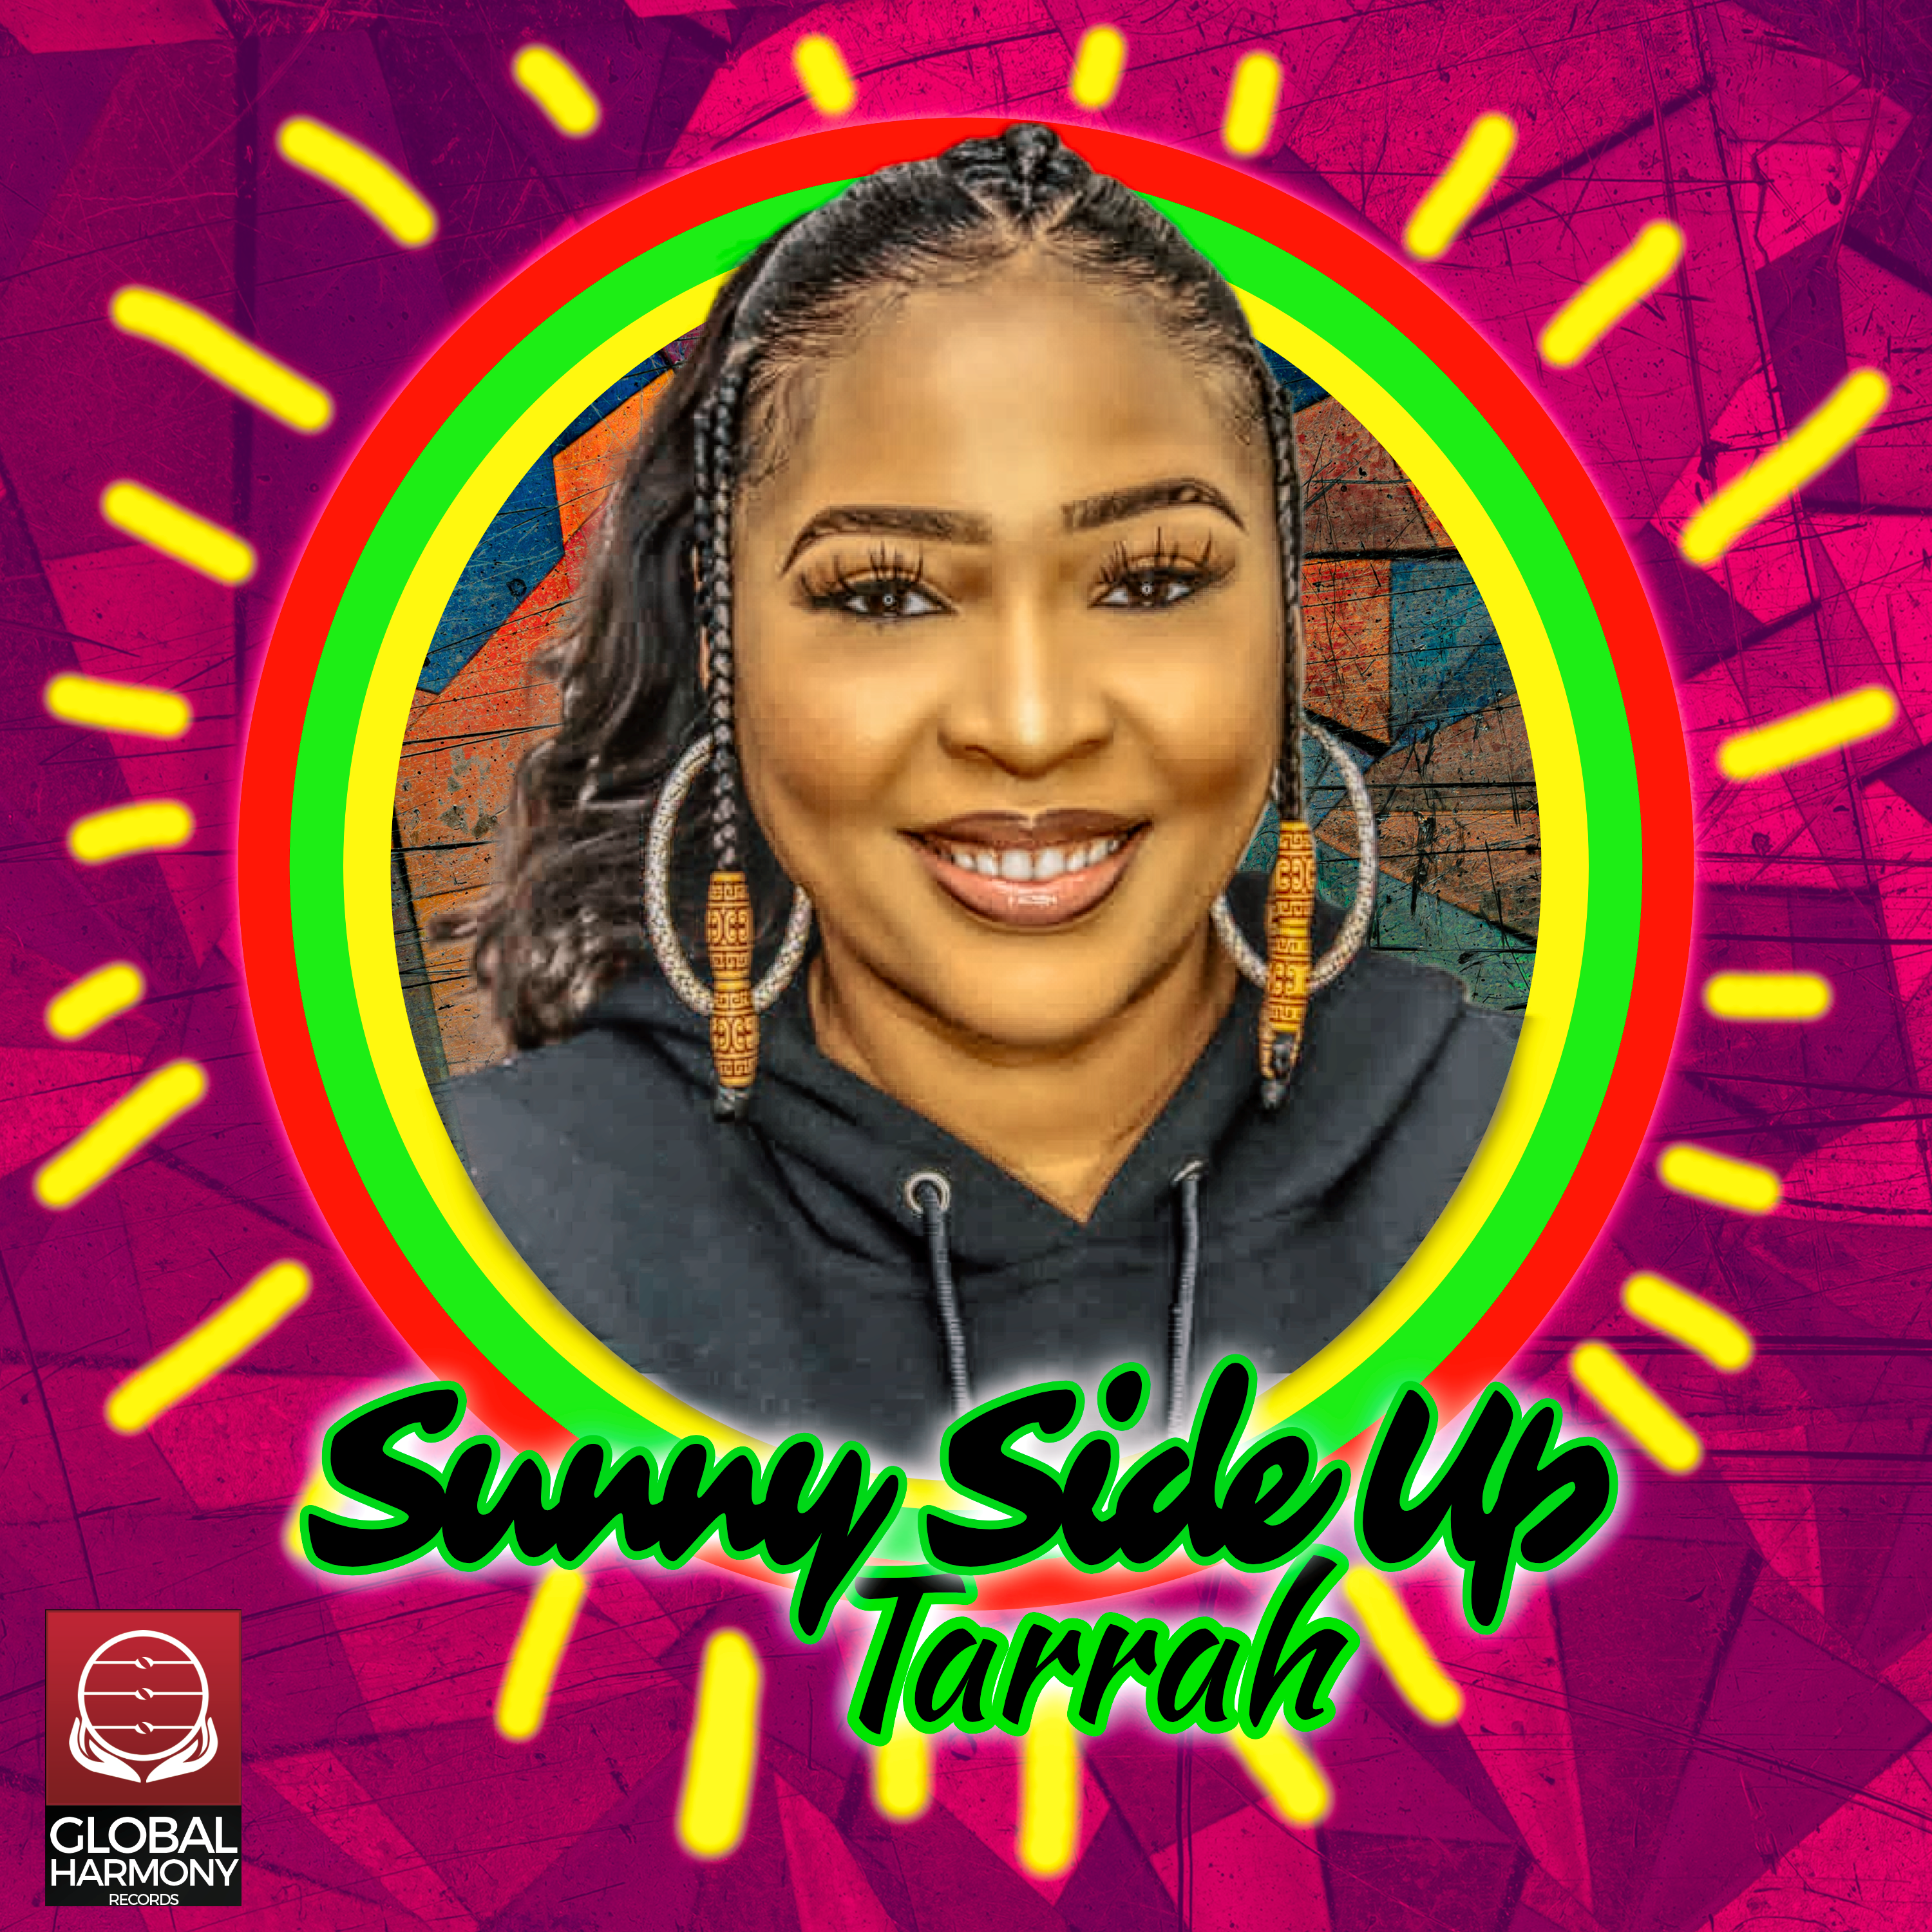 ‘Tarrah’ encourages listeners to keep the “Sunny Side Up” on her new single out now.